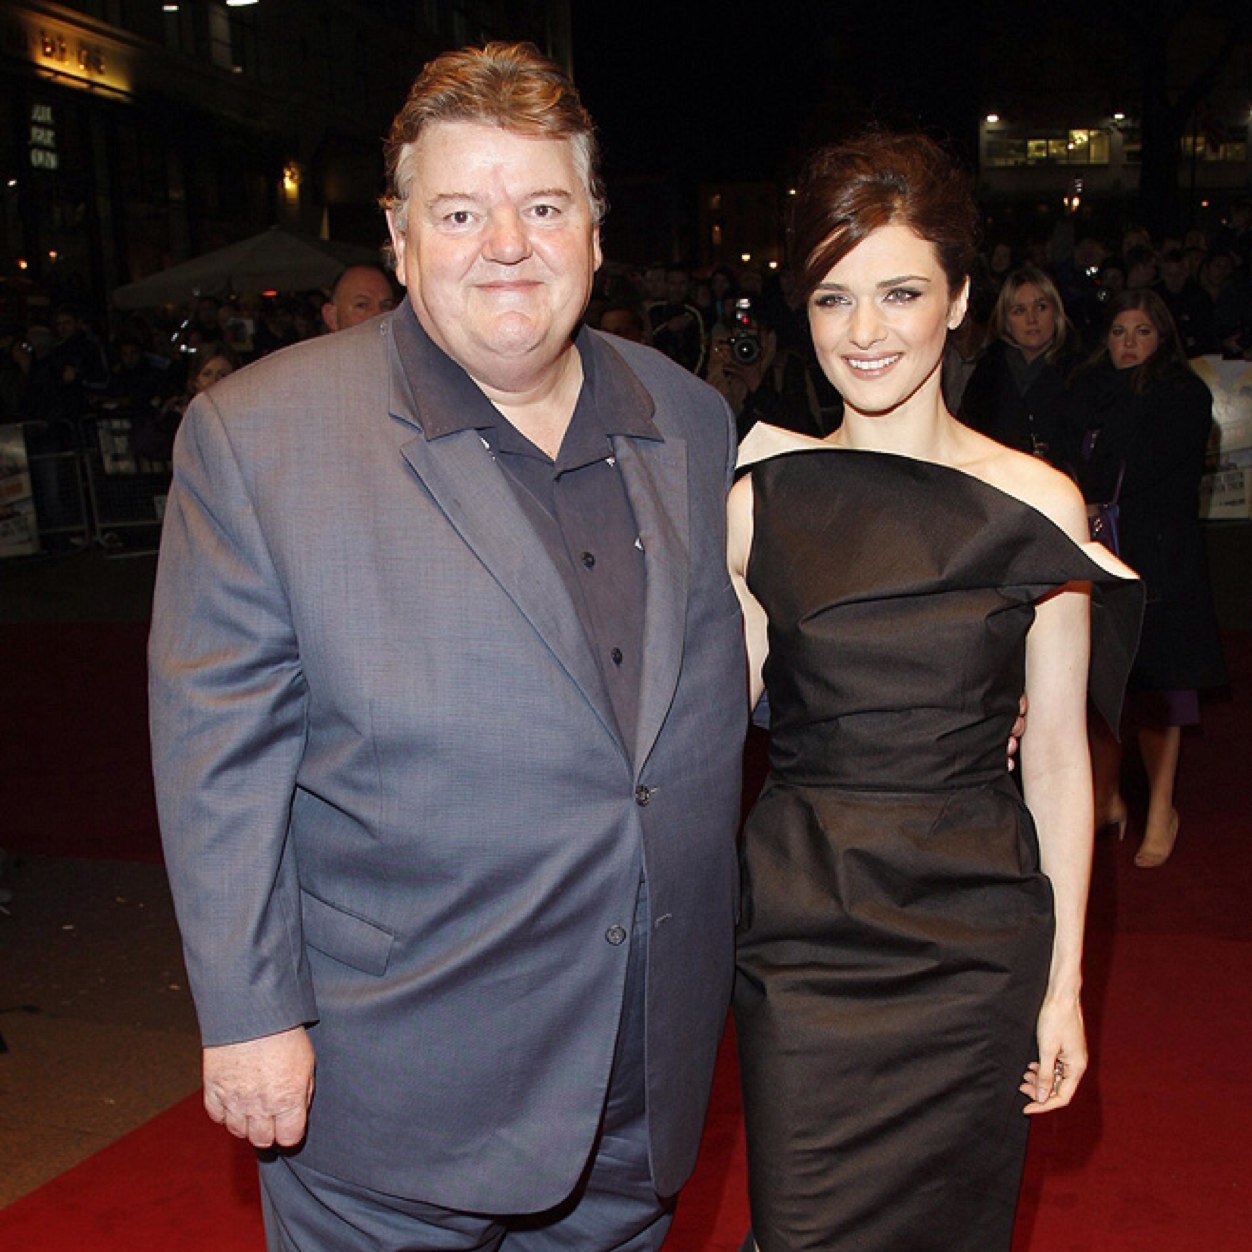 Robbie Coltrane with beautiful, gracious, endearing, Wife Rhona Gemmell 